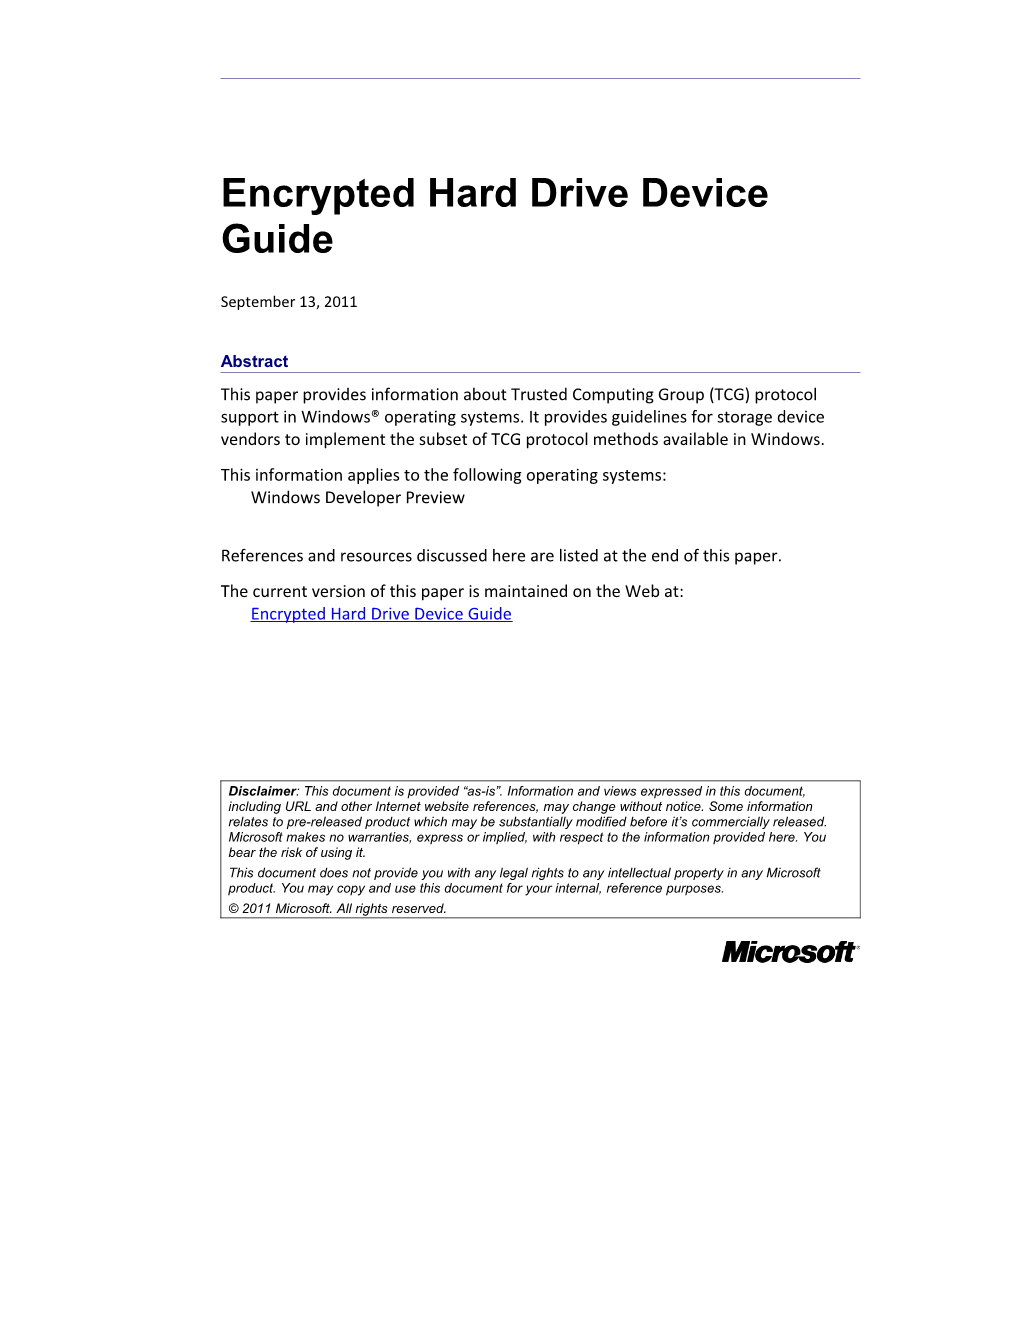 Encrypted Hard Drive Device Guide